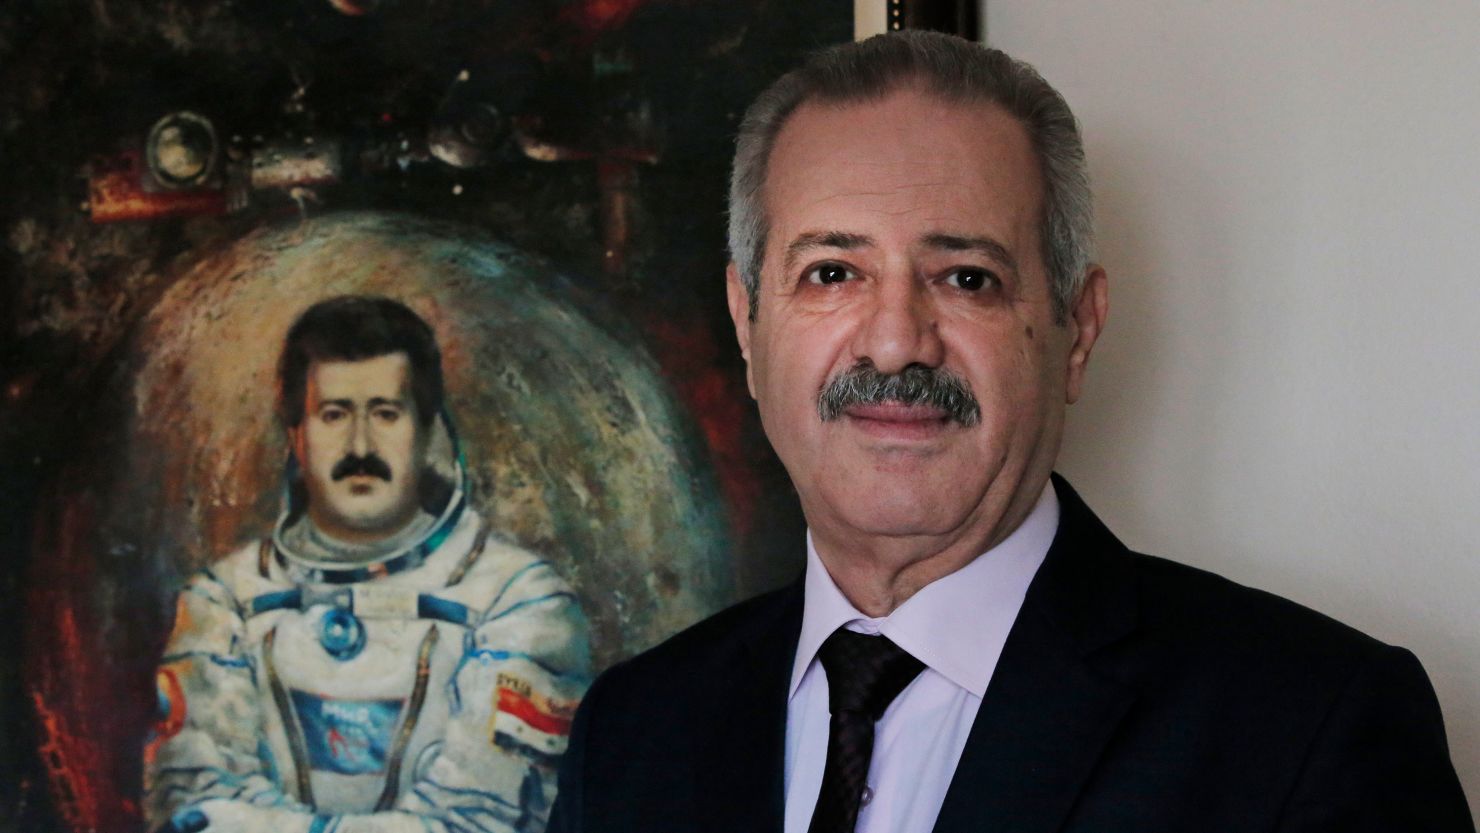 Mohammad Faris, Syria's first astronaut, next to a painting of him in a space suit, in Istanbul, 2016.